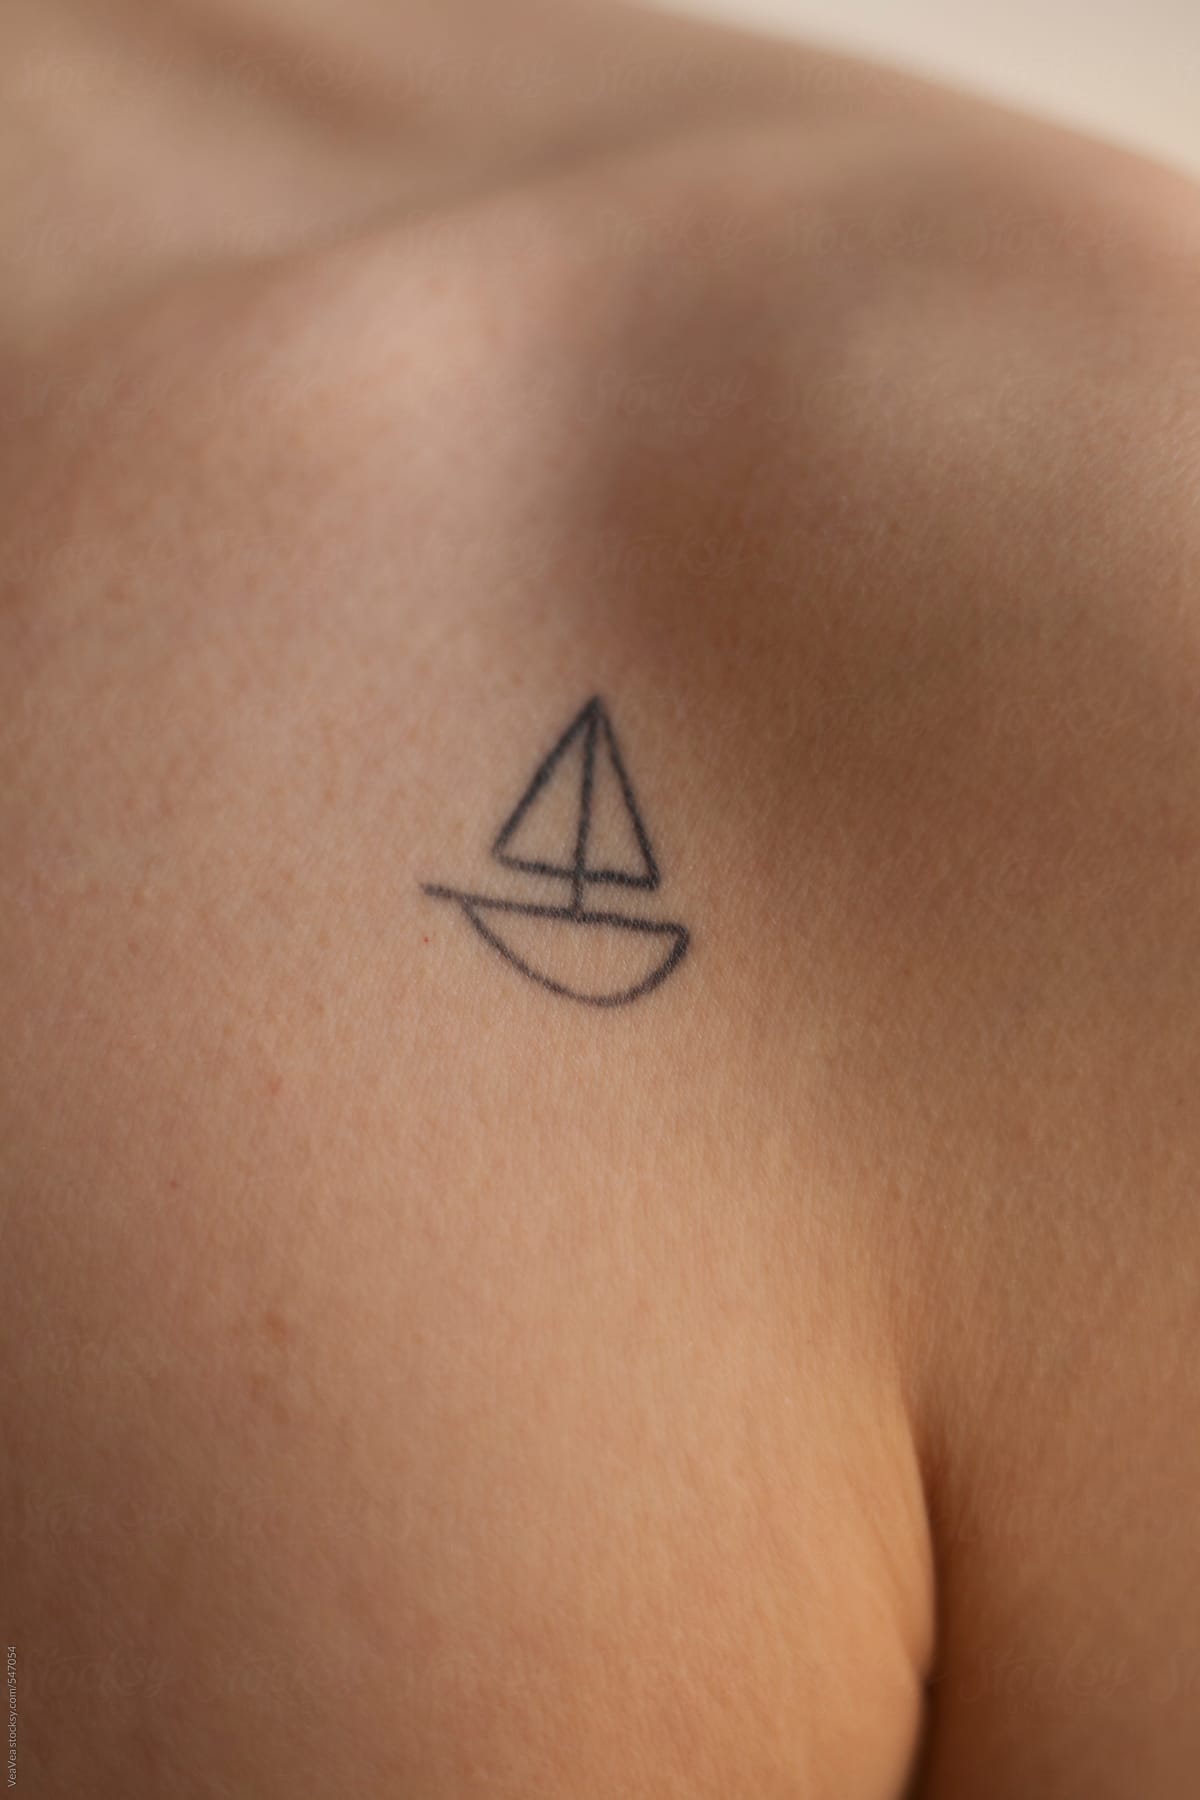 50 Simple Tattoo Ideas With Meaning for Women